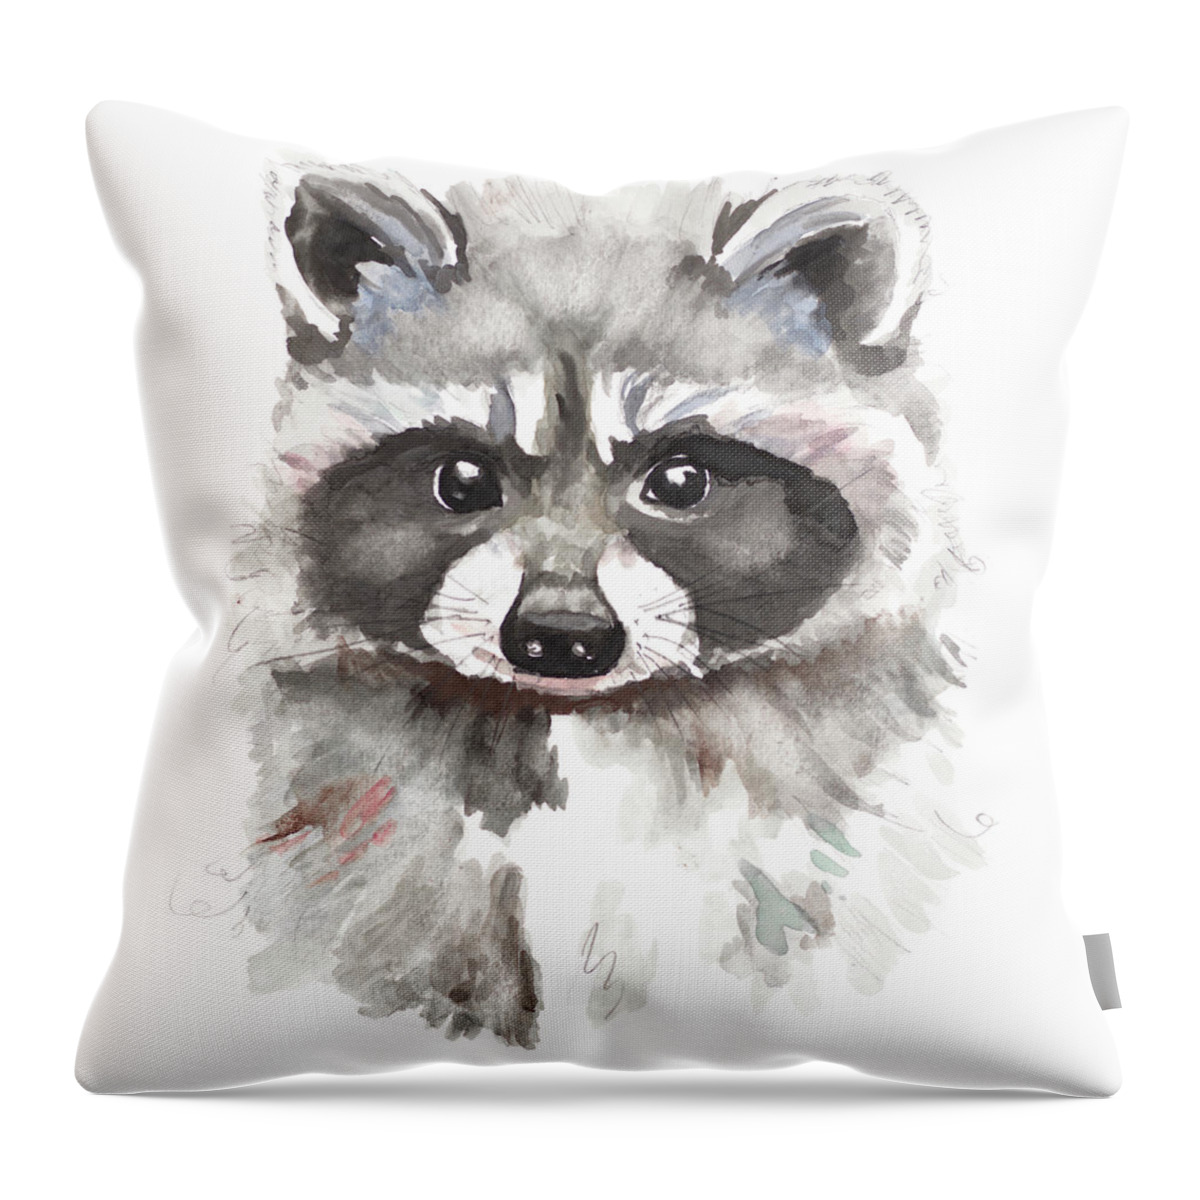 Baby Throw Pillow featuring the painting Baby Raccoon by Patricia Pinto